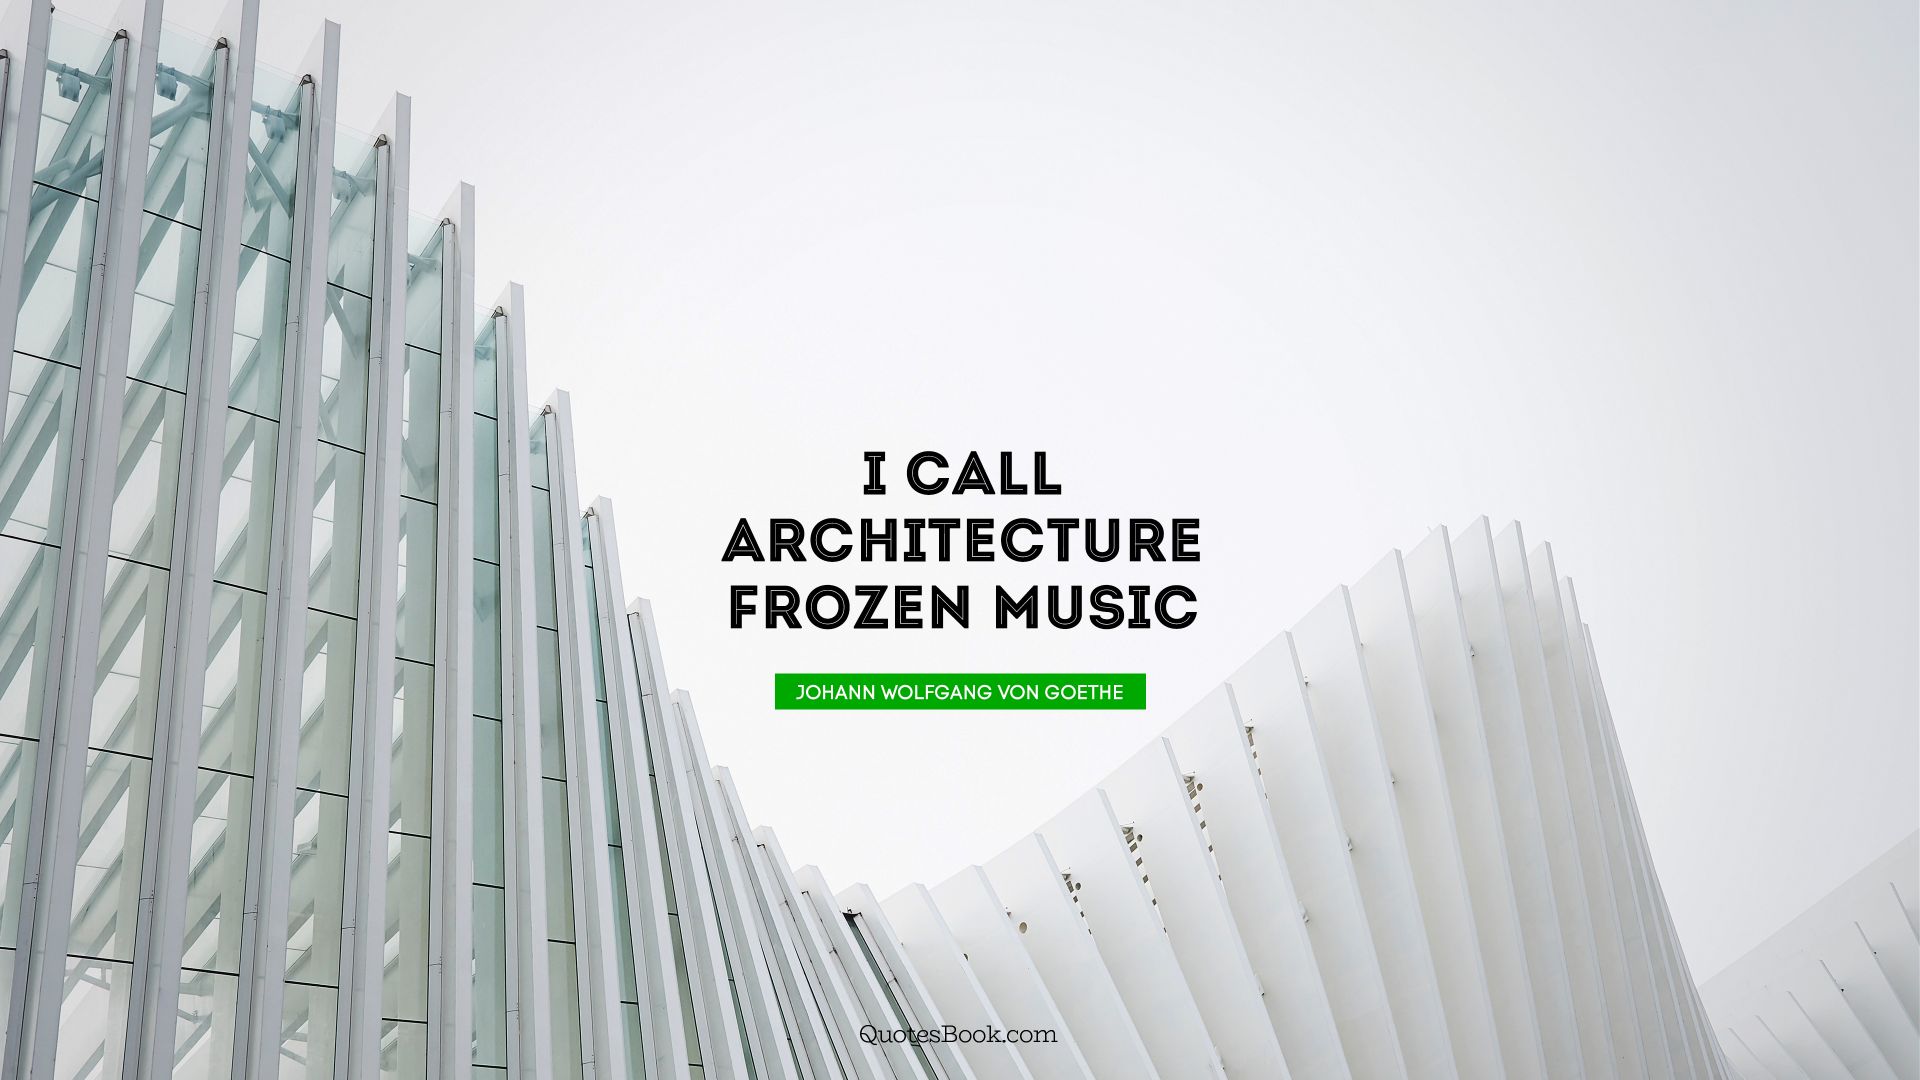 I call architecture frozen music. - Quote by Johann Wolfgang von Goethe